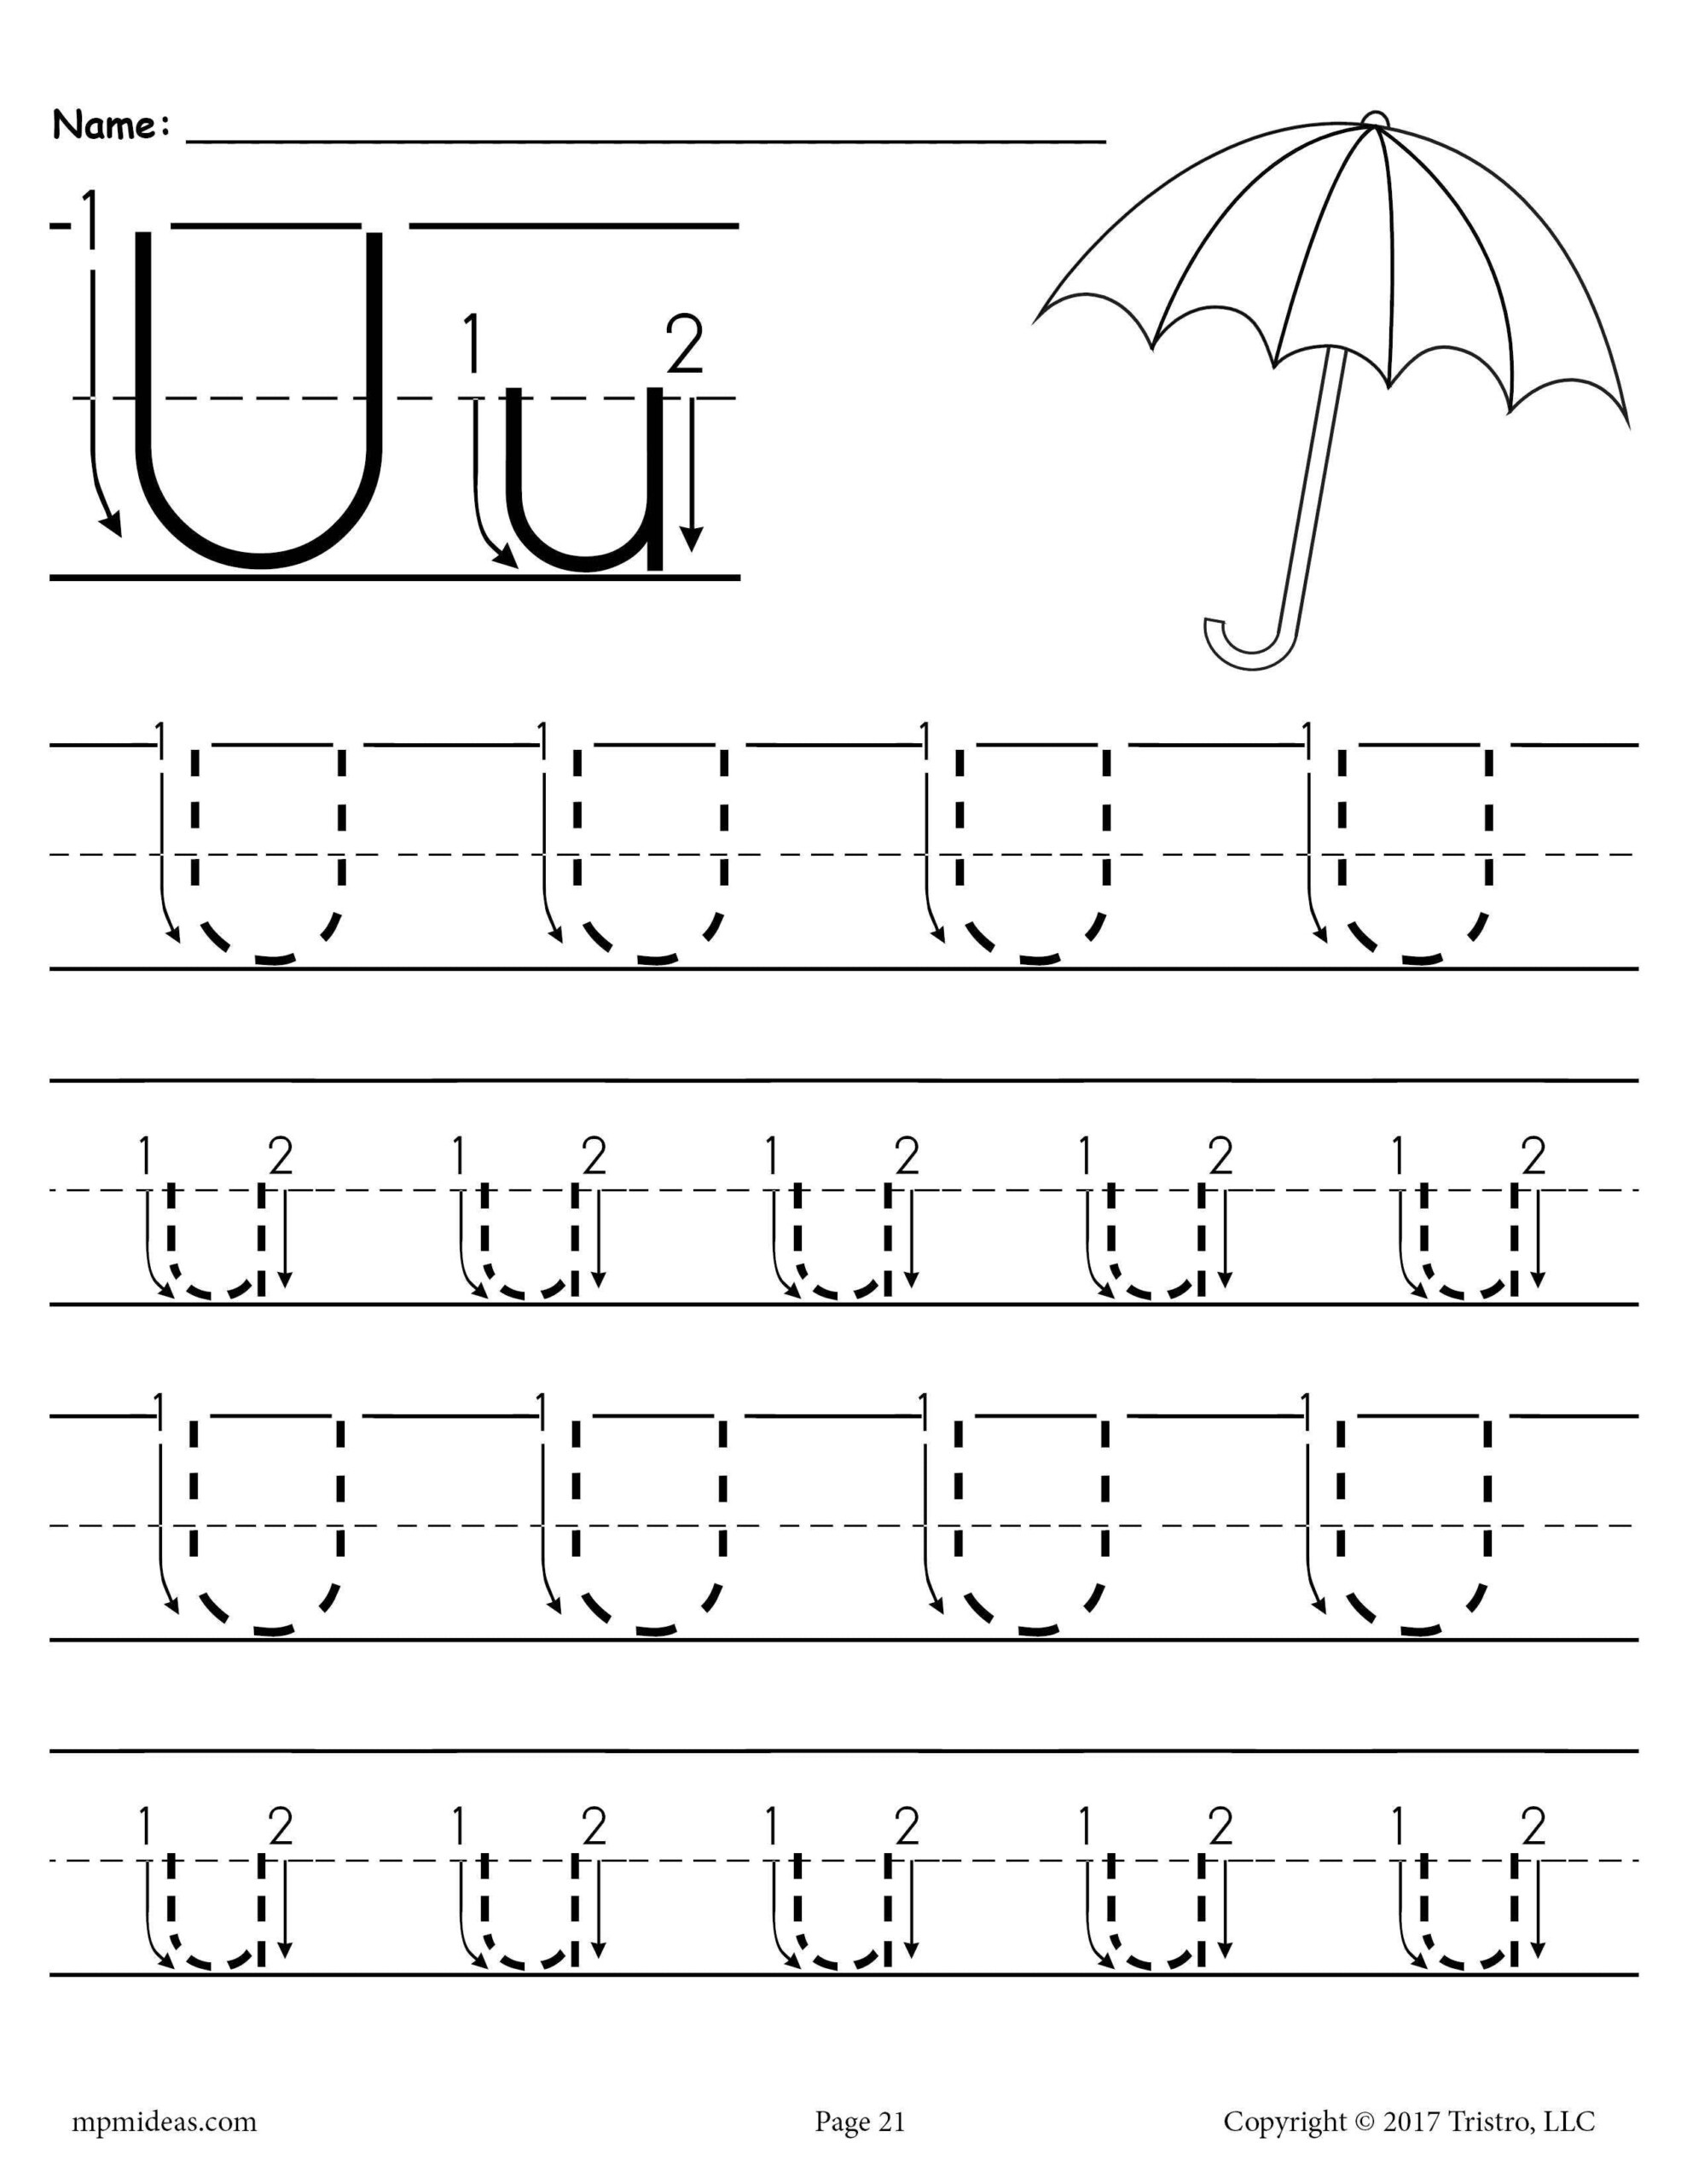 Printable Letter U Tracing Worksheet With Number And Arrow Guides In